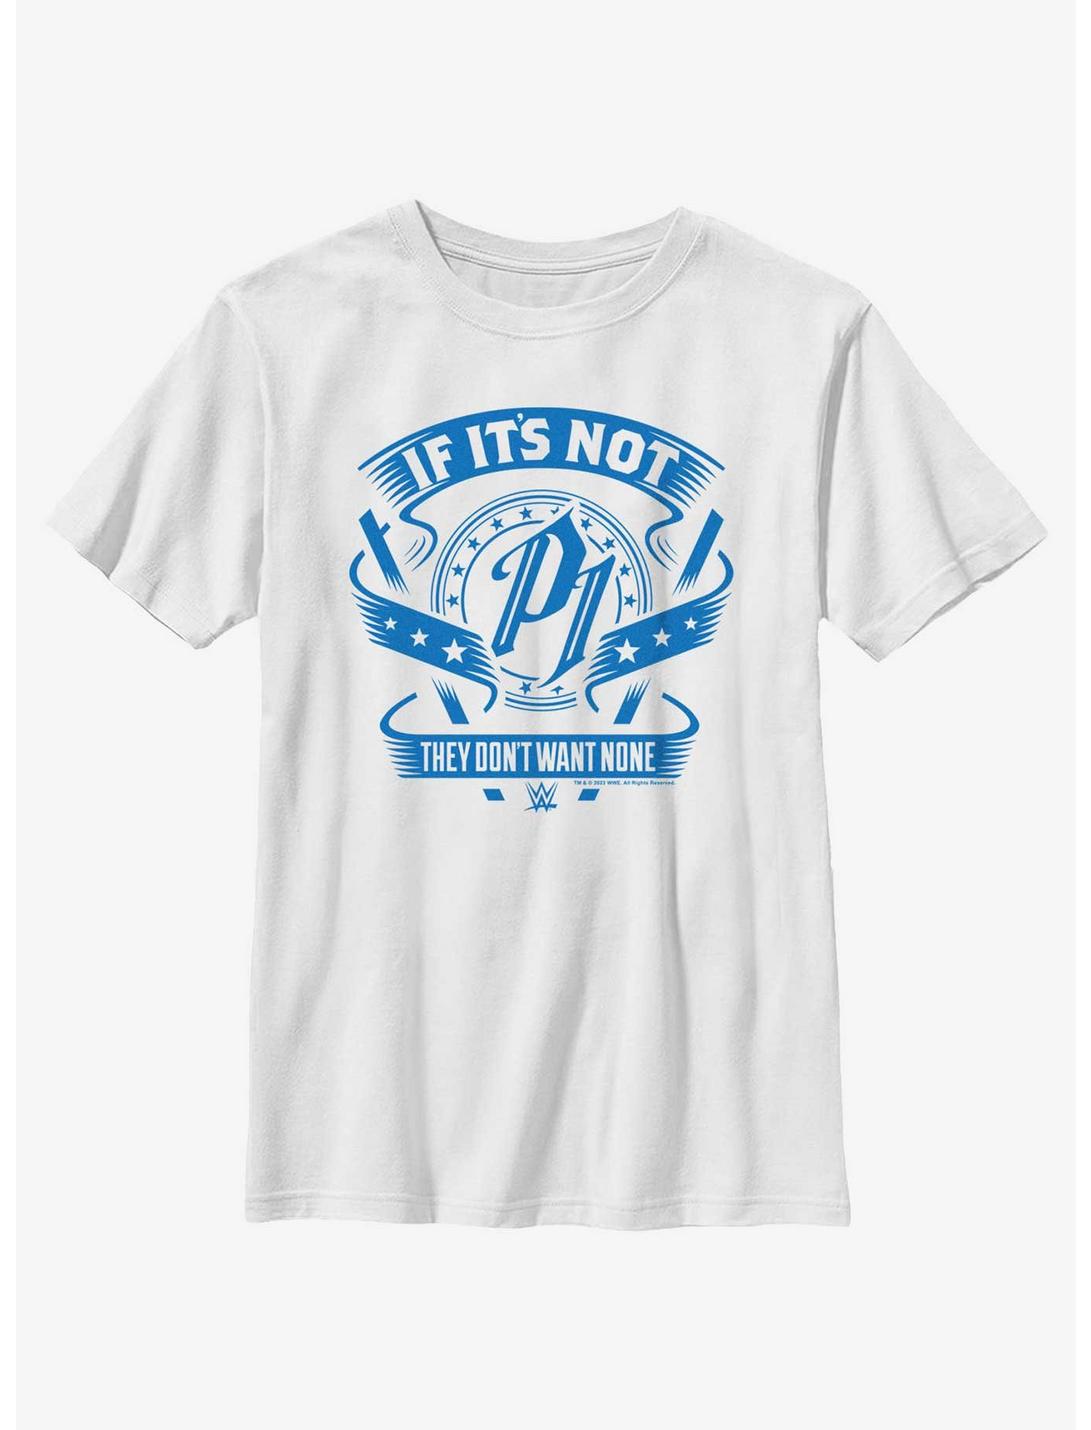 WWE AJ Styles They Don't Want None Youth T-Shirt, WHITE, hi-res